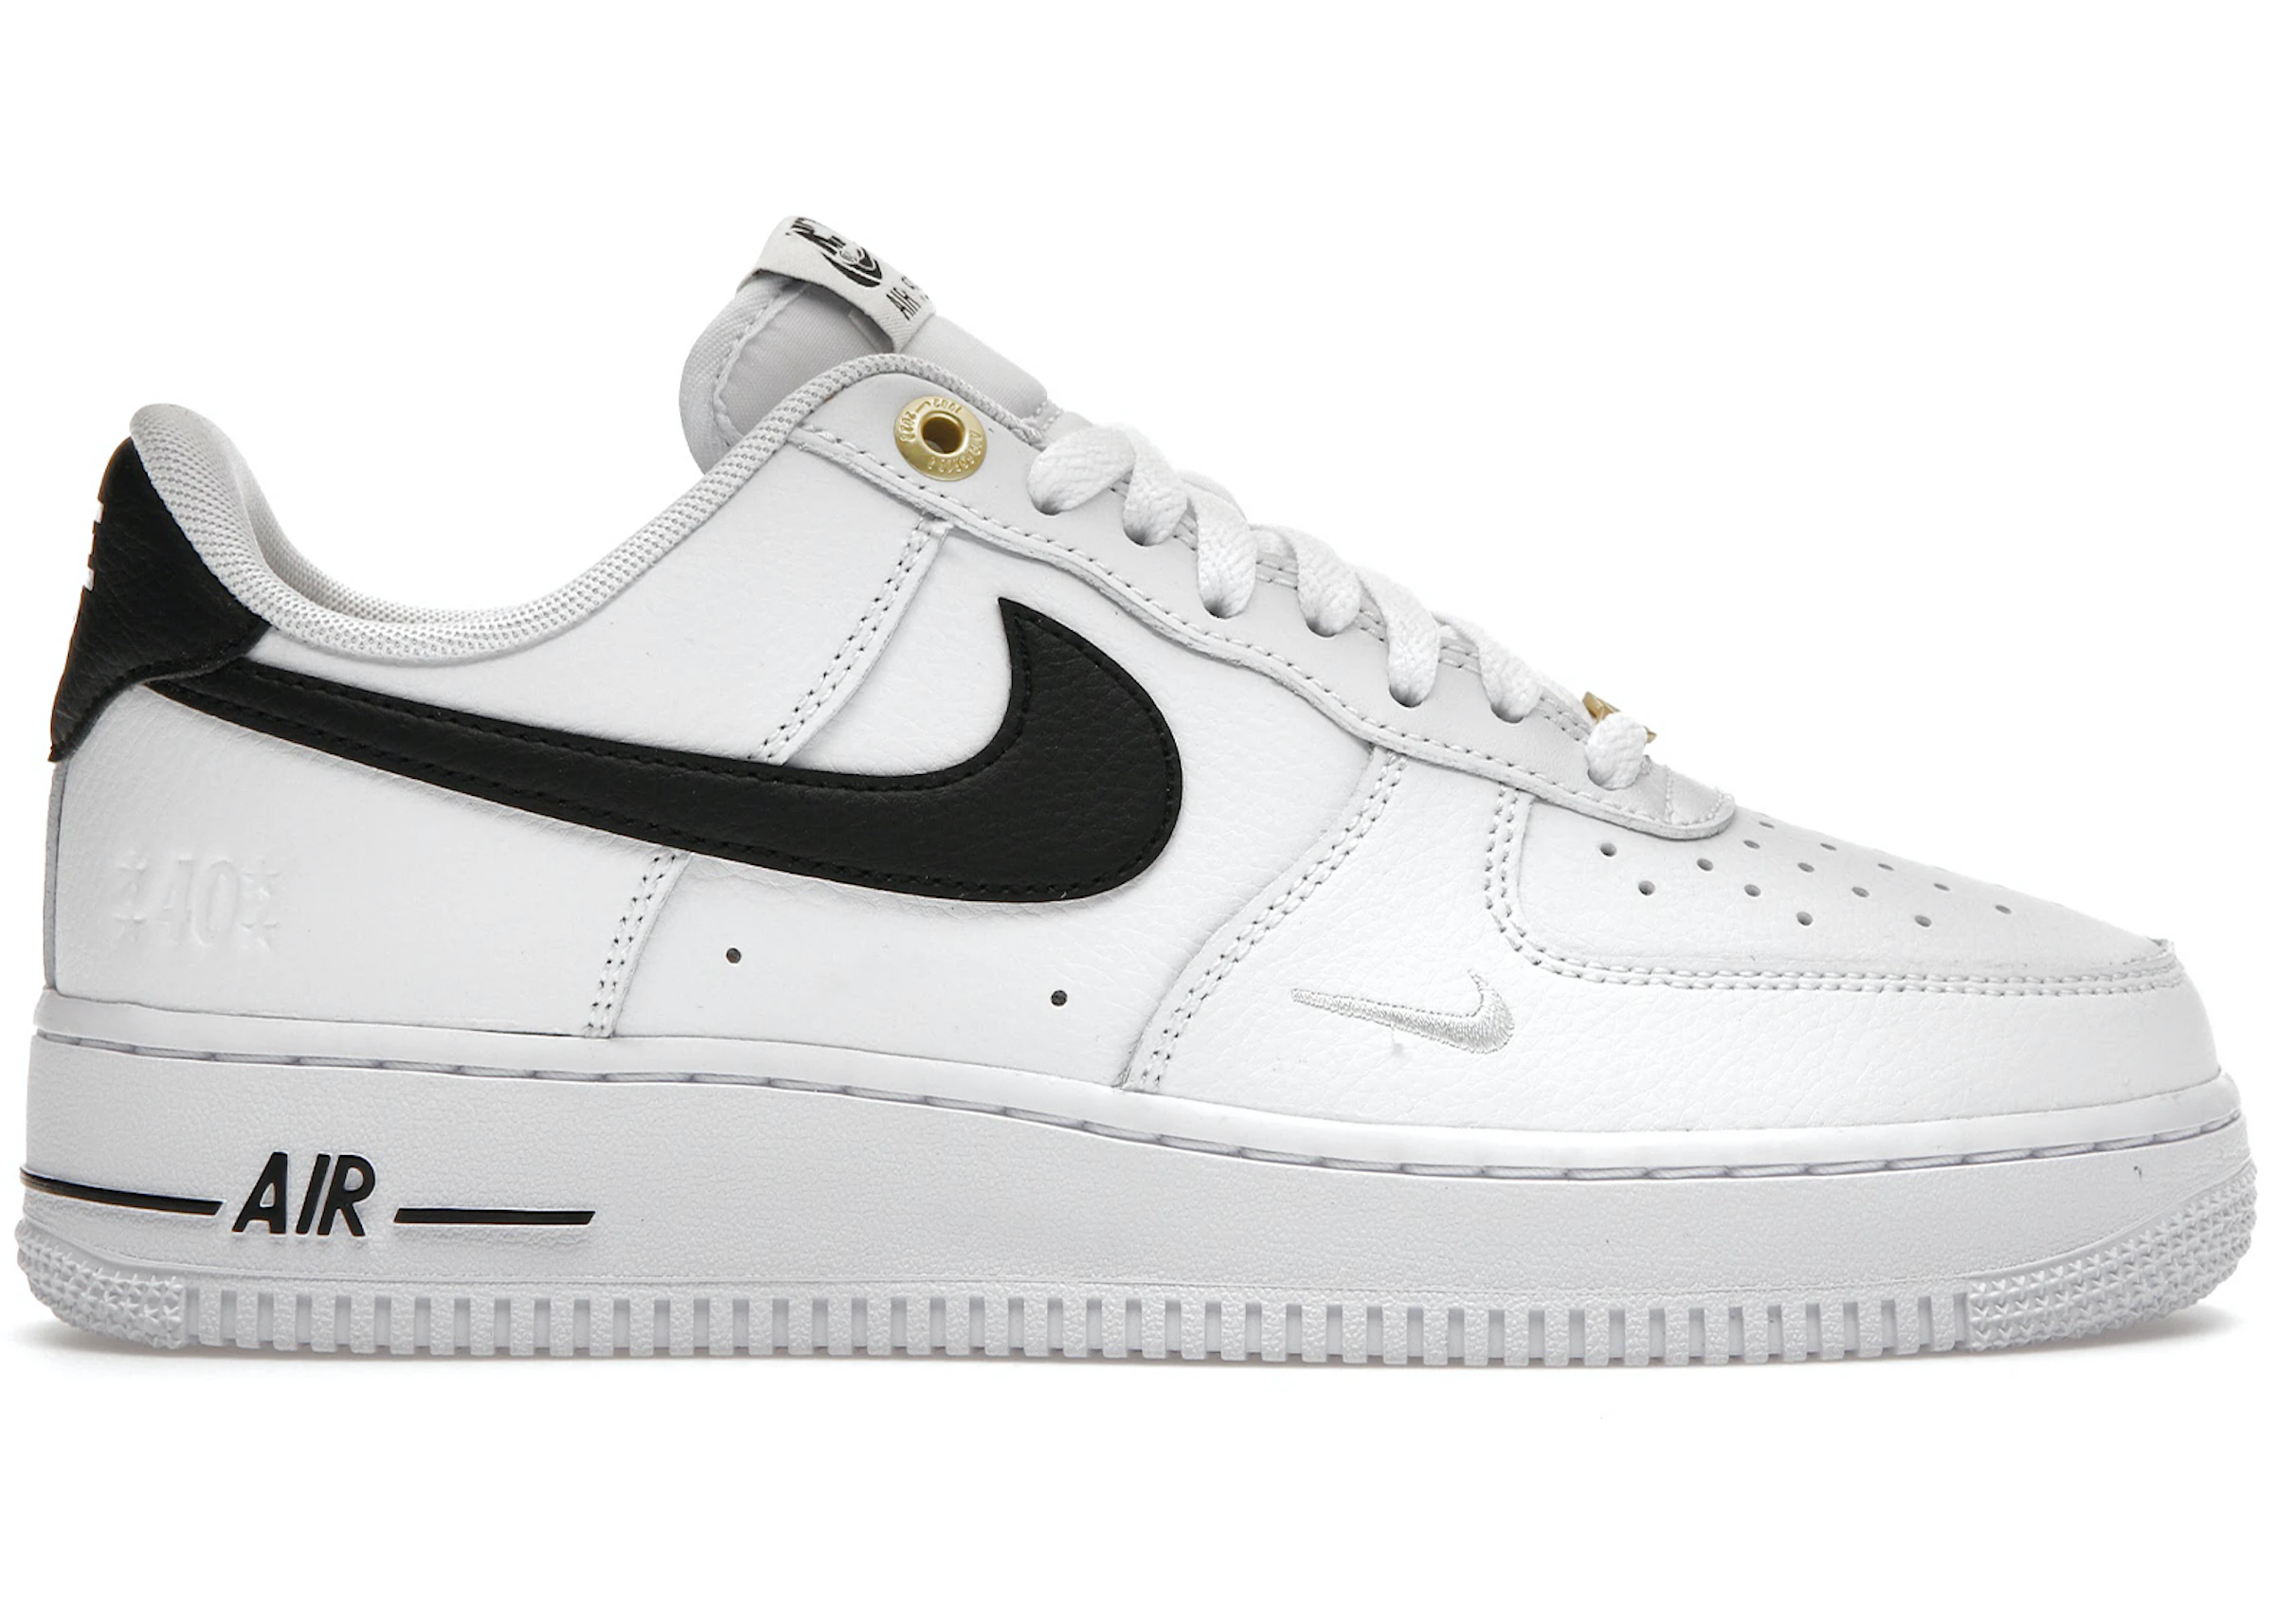 Changes from Painstaking Massage Nike Air Force 1 Low '07 LV8 40th Anniversary White Black - DQ7658-100 - US